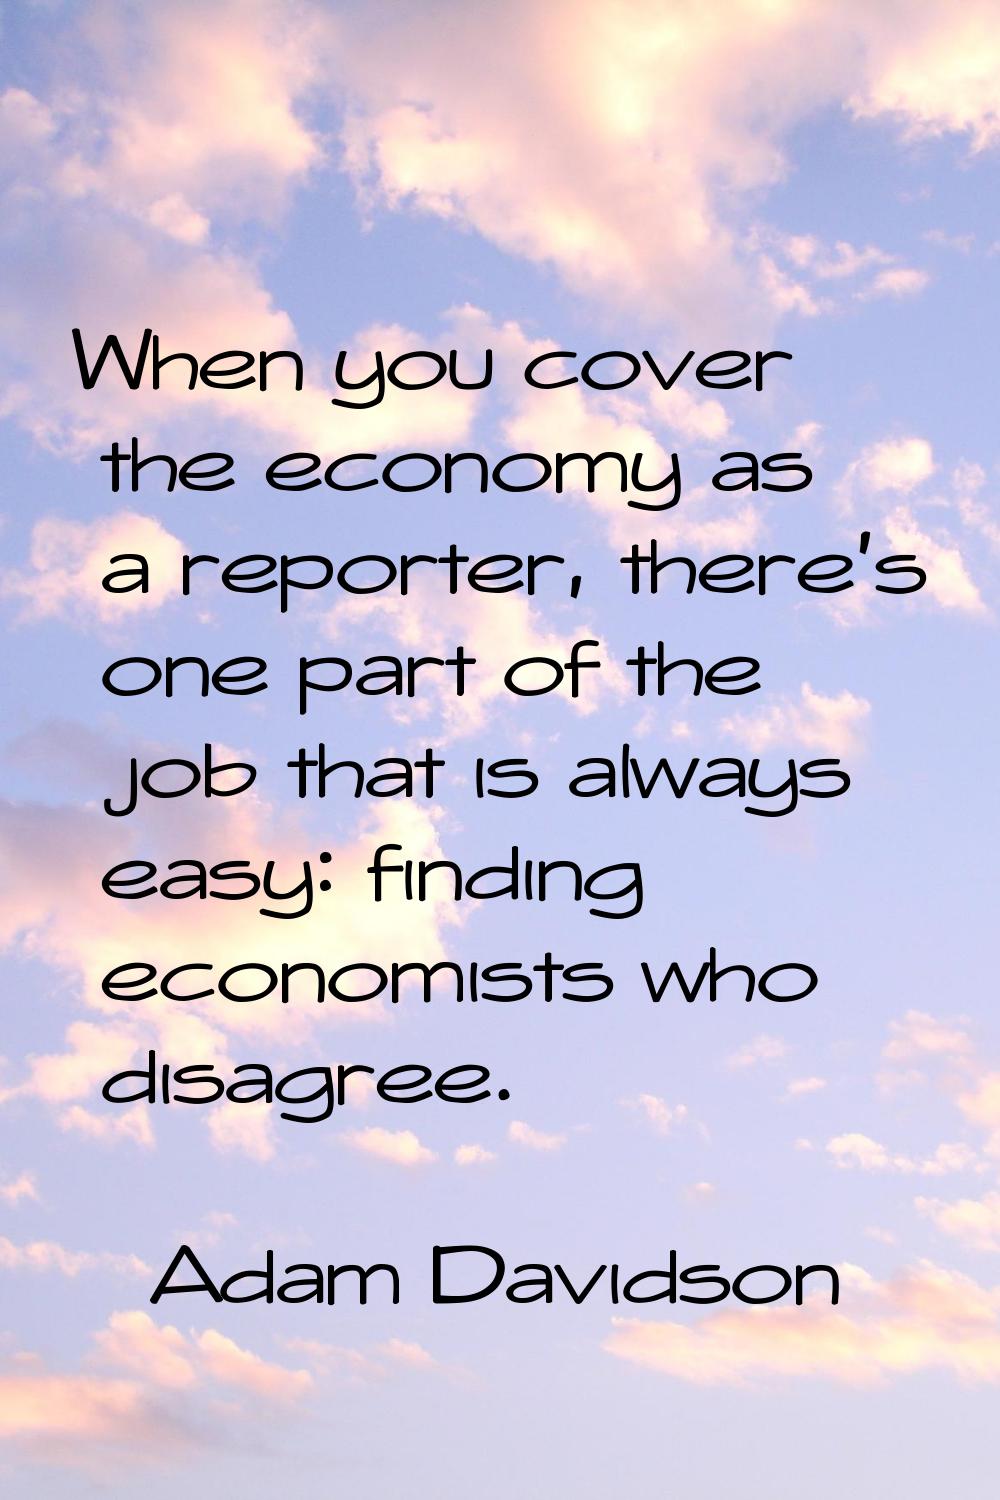 When you cover the economy as a reporter, there's one part of the job that is always easy: finding 